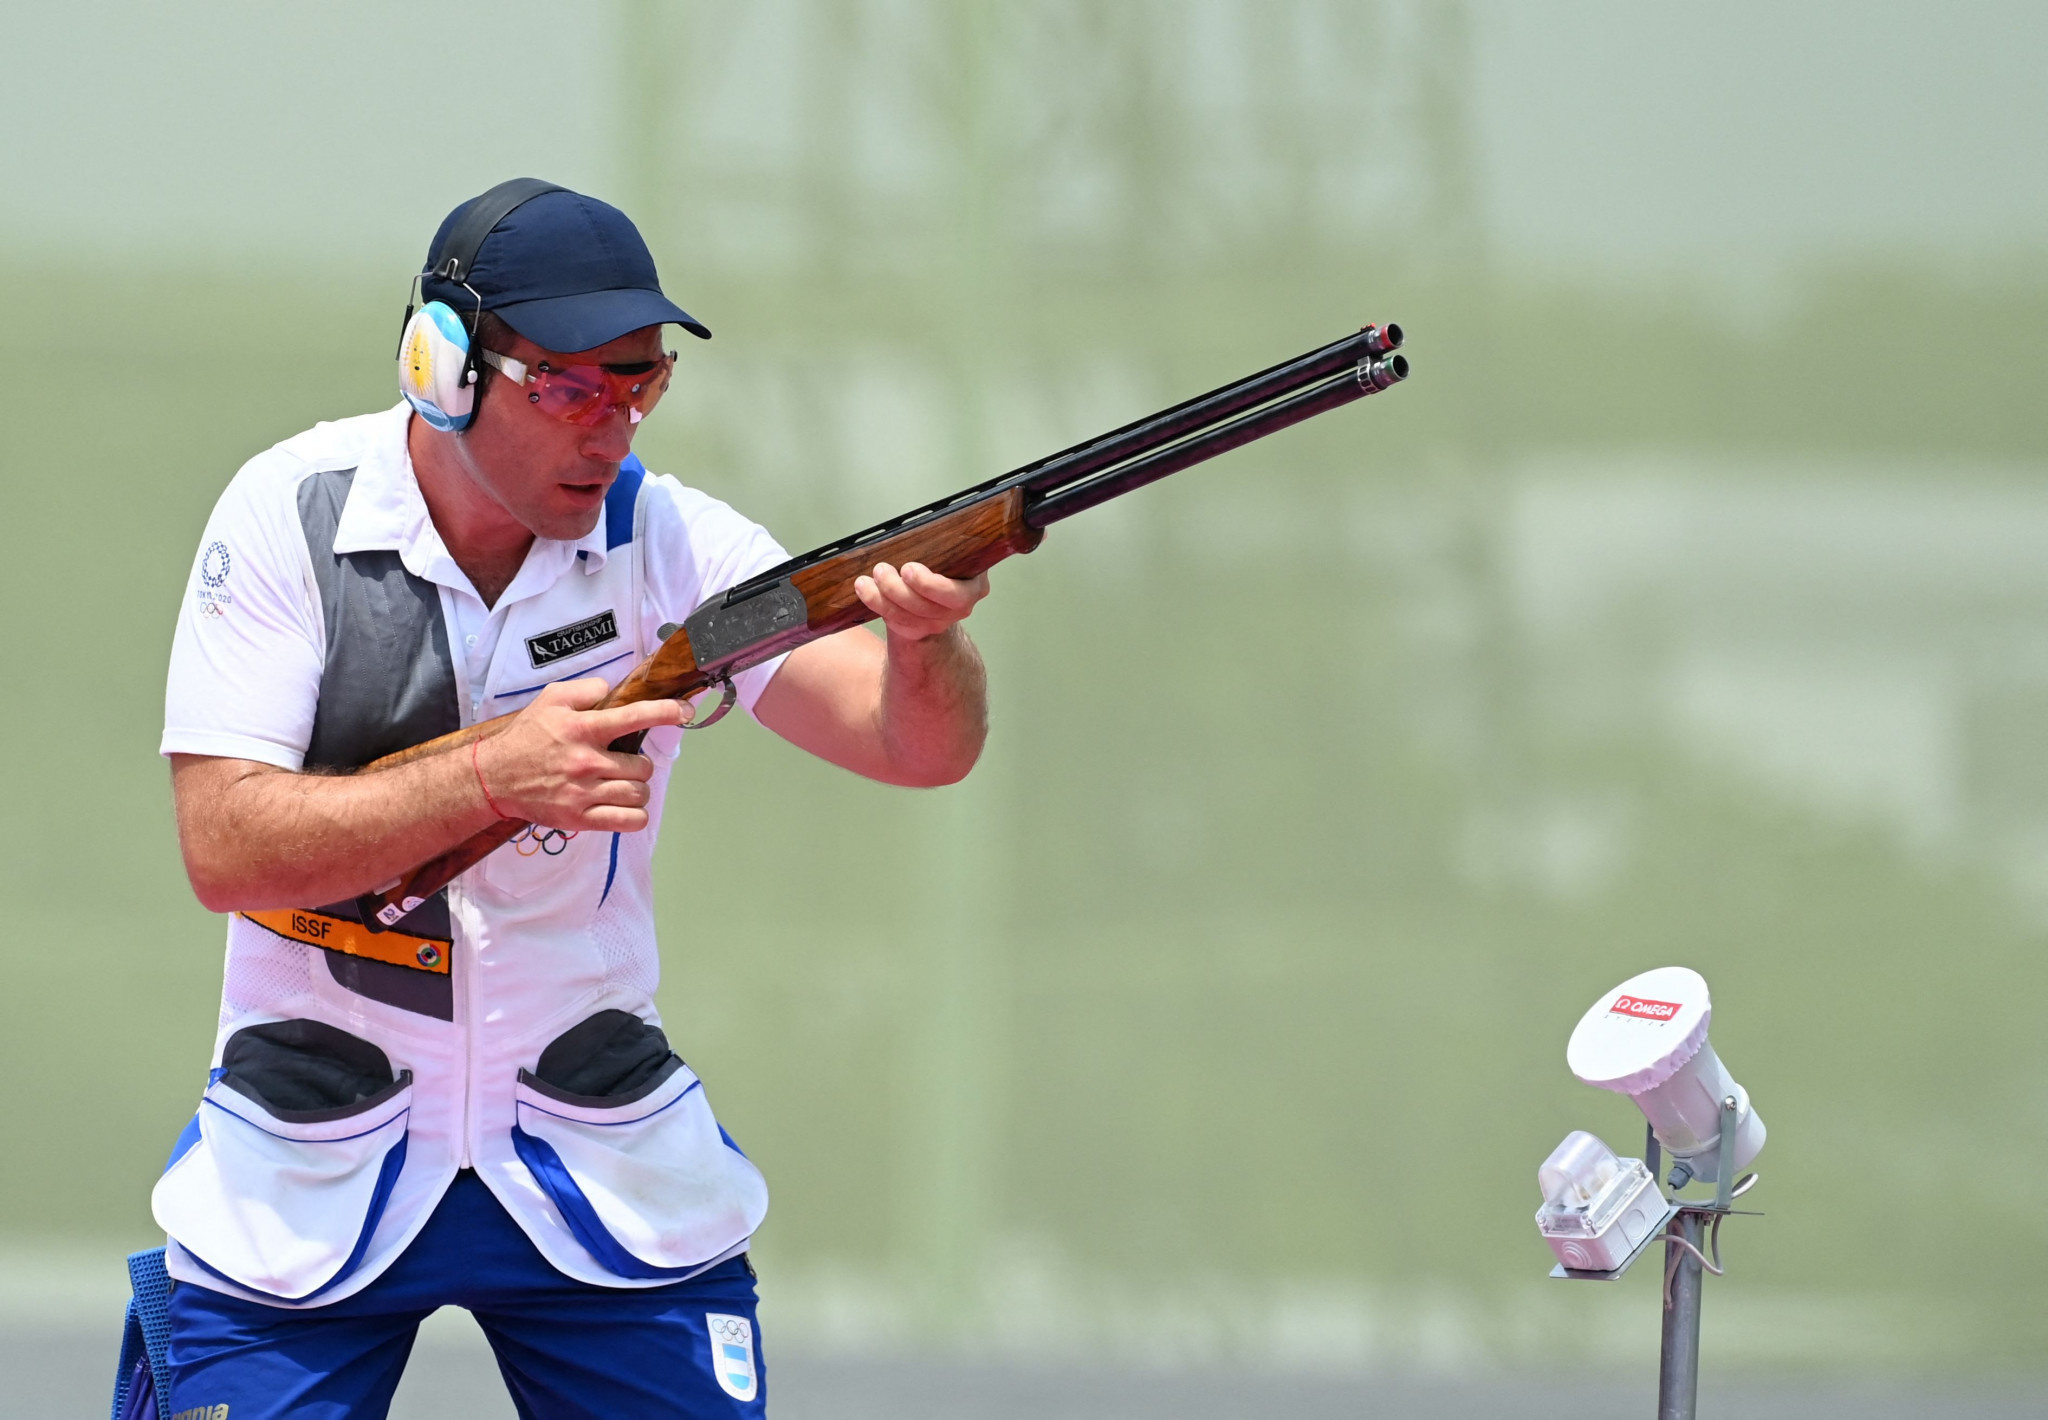 Skeet Shooting: Lucie Anastassiou, A French sports shooter, ISSF Shotgun World Cup in Lima participant. 2050x1420 HD Wallpaper.